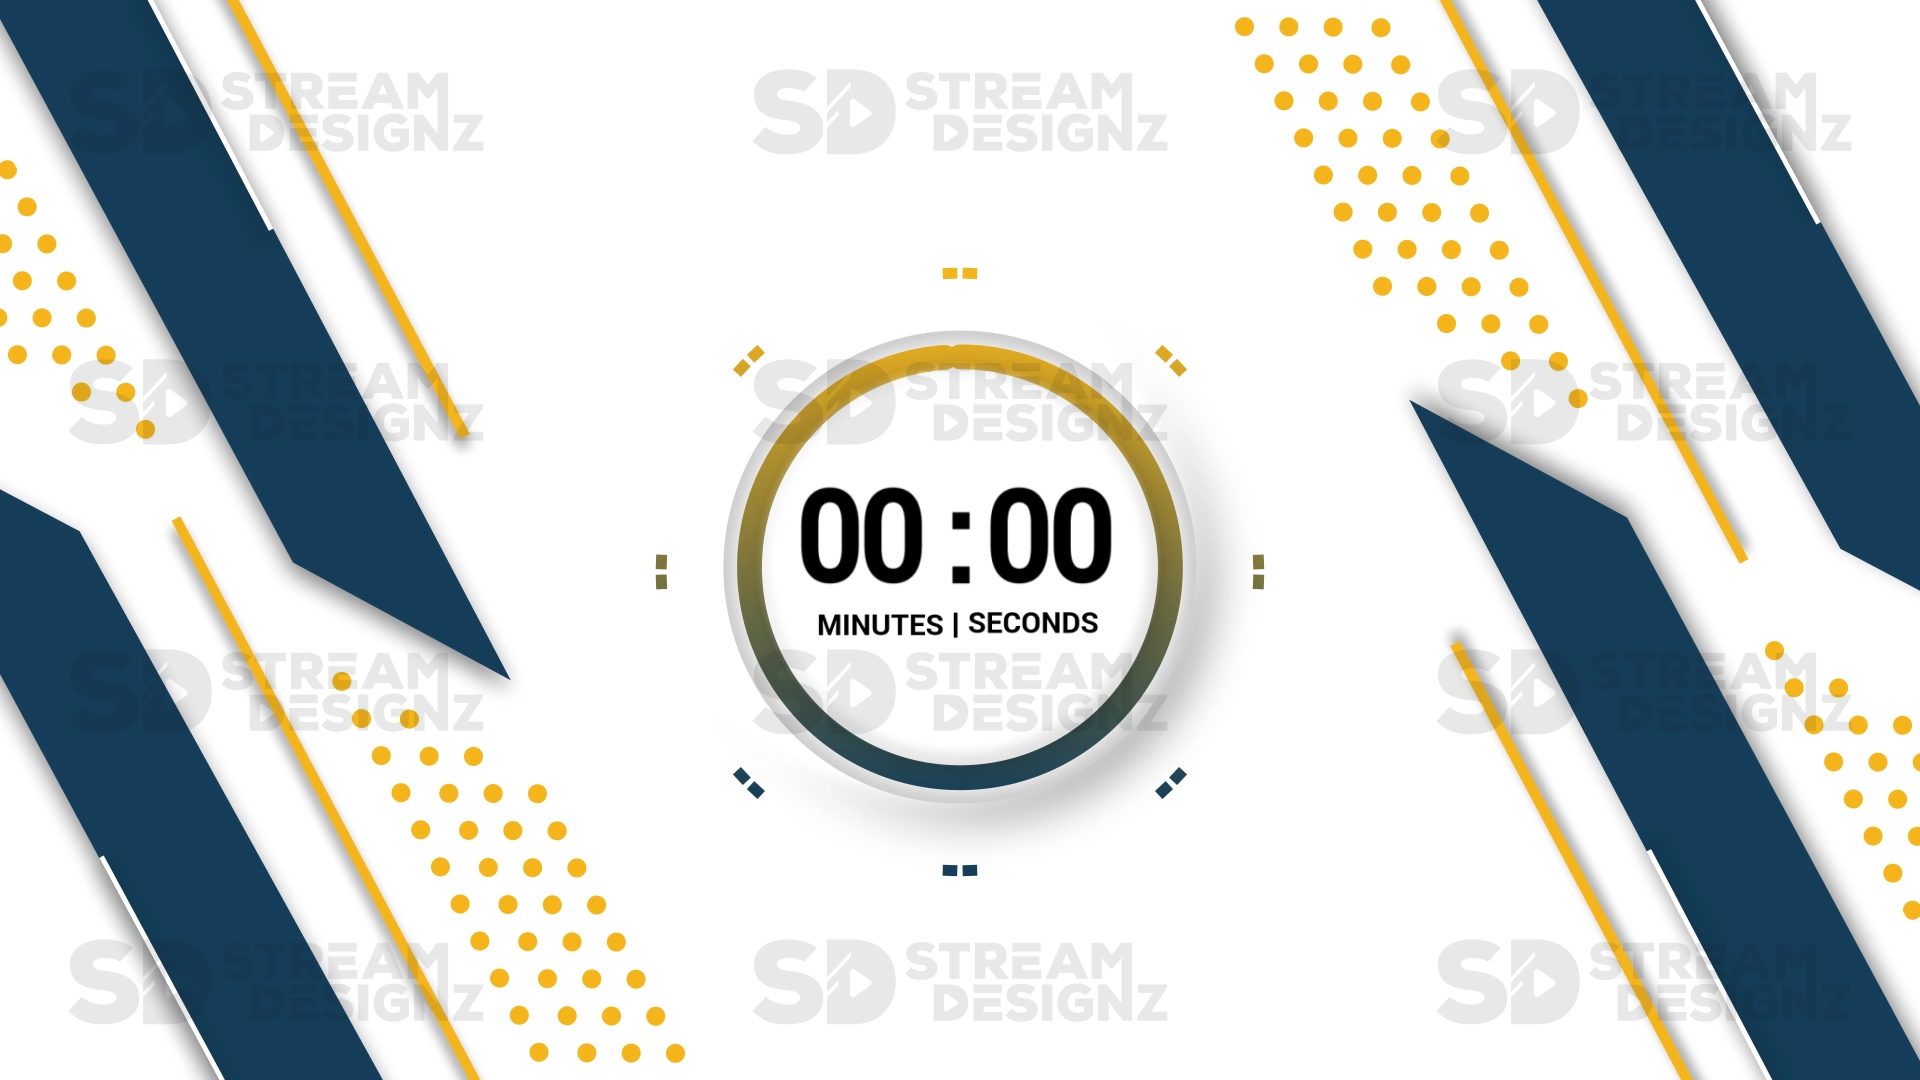 5 minute count up timer sleek yellow and blue thumbnail stream designz